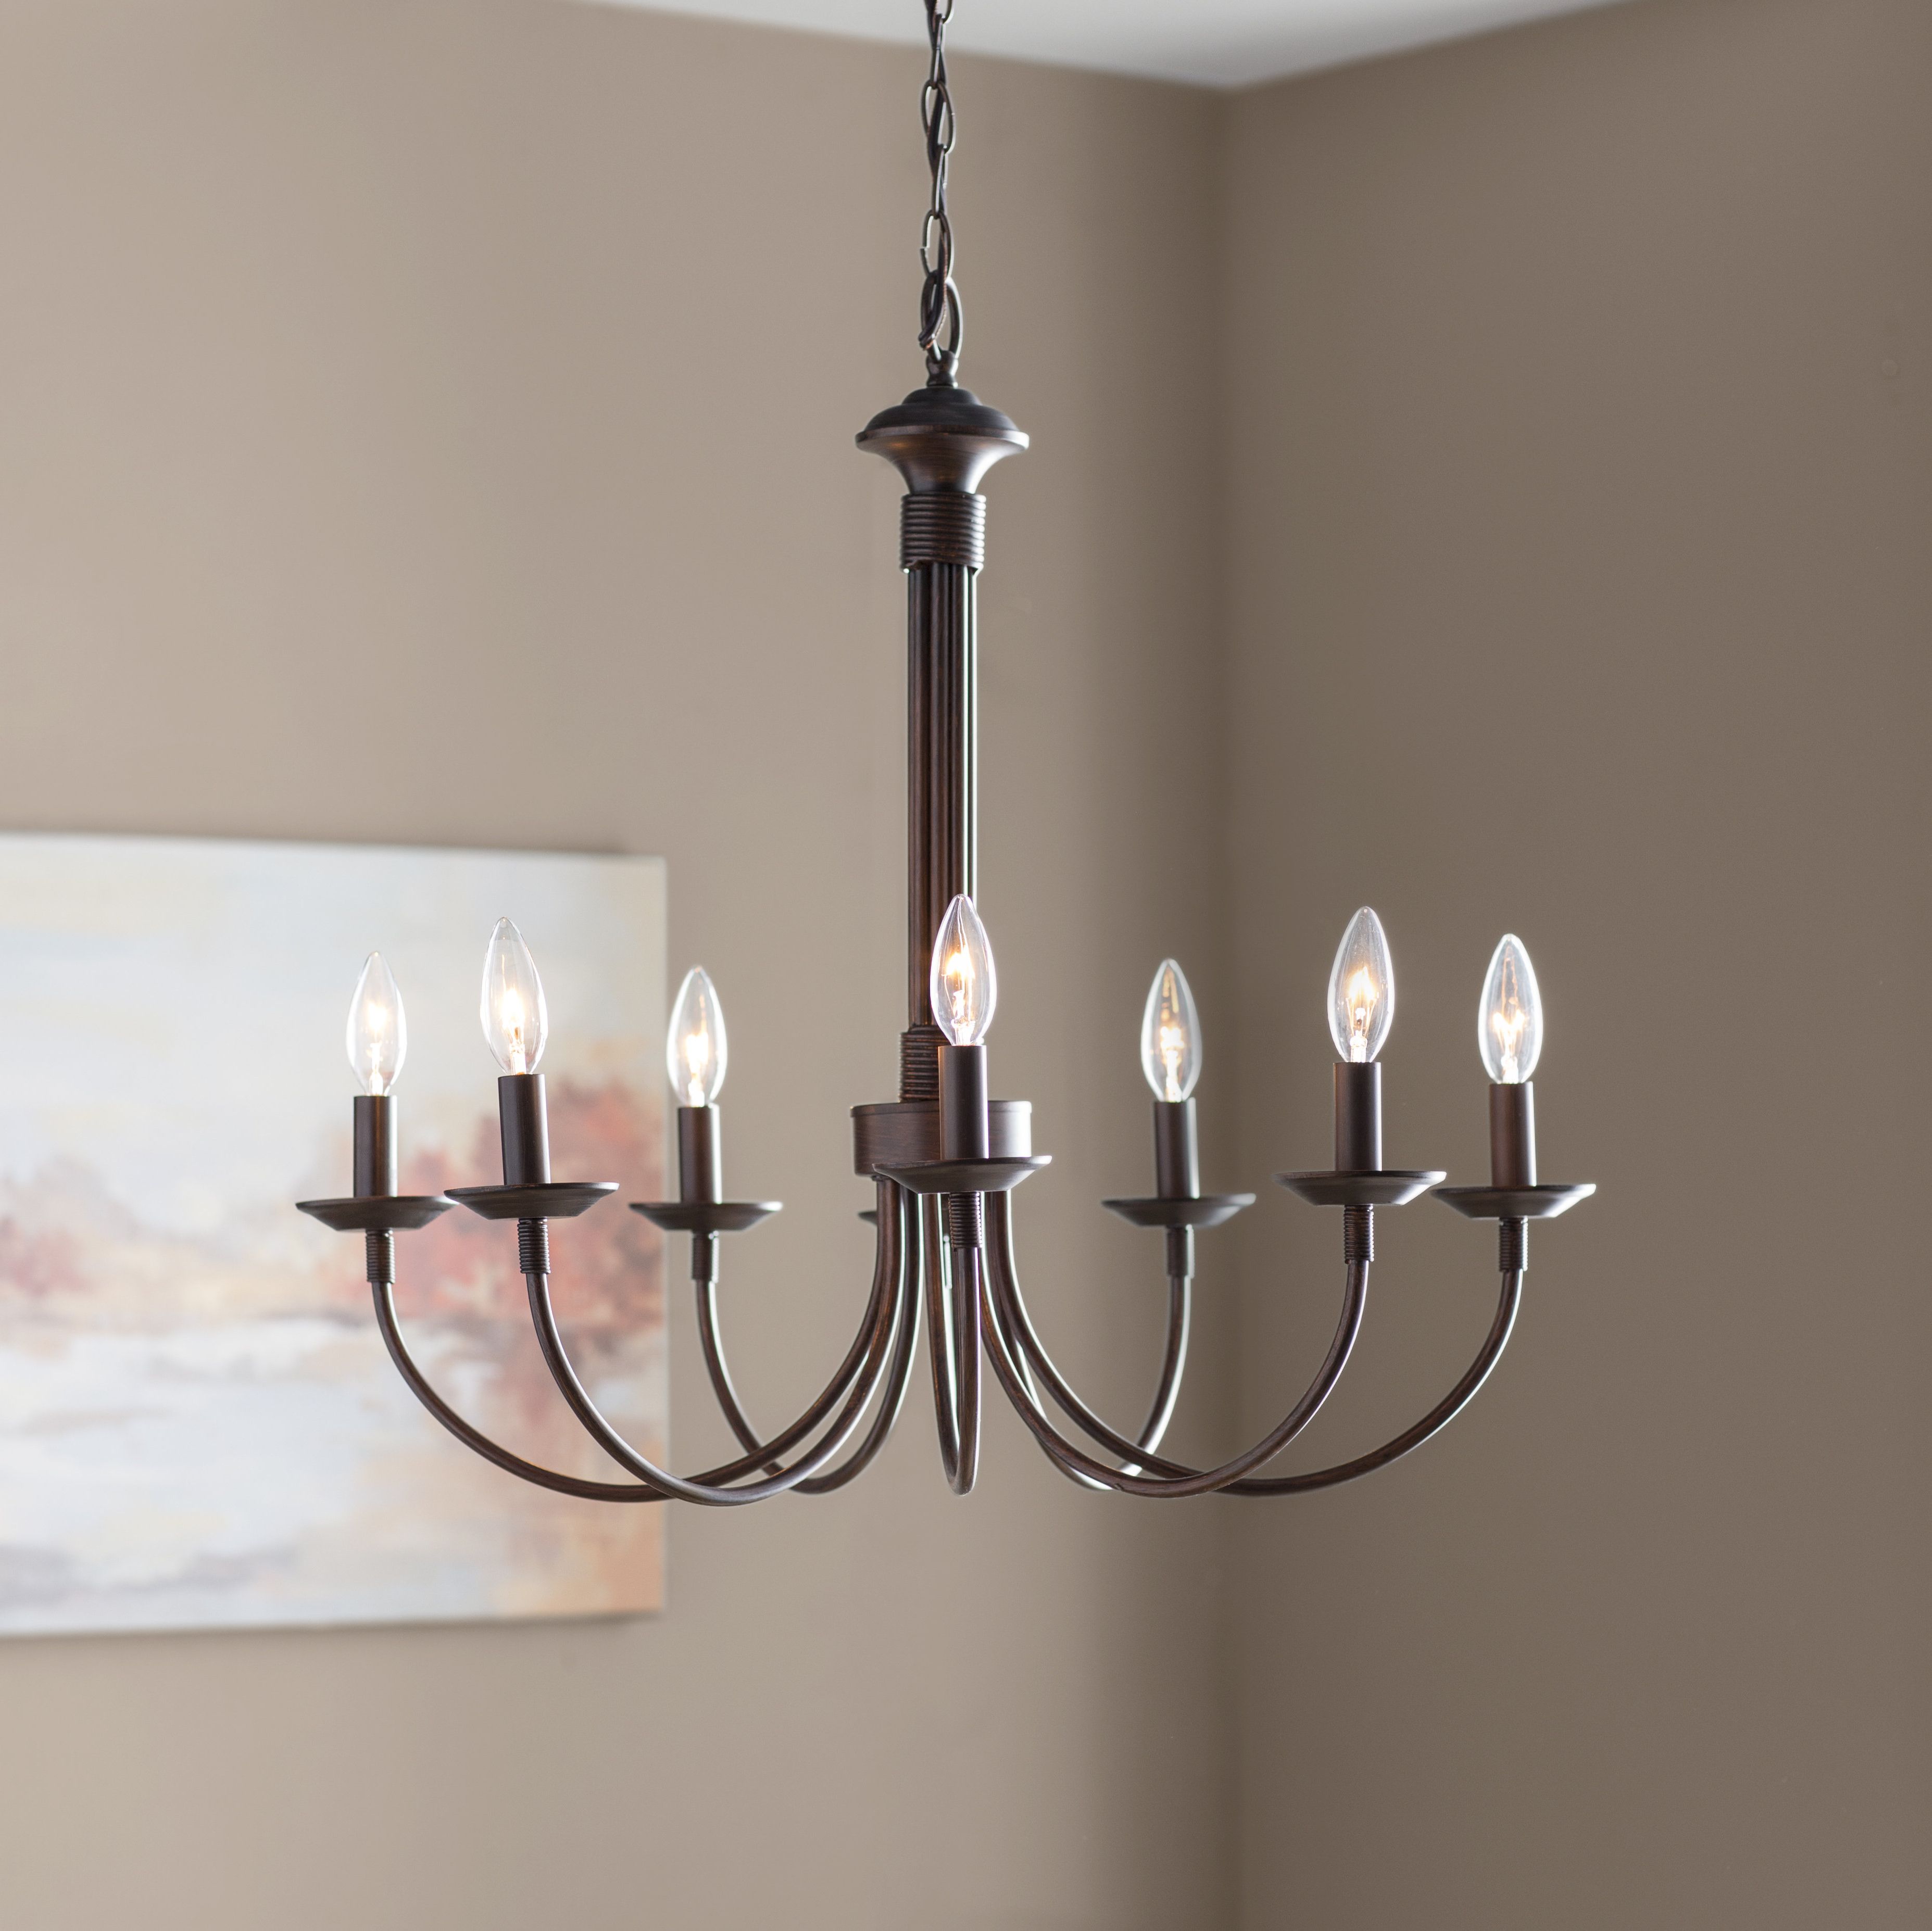 Trendy Shaylee 8 Light Candle Style Chandeliers Regarding Shaylee 8 Light Candle Style Chandelier (View 1 of 25)